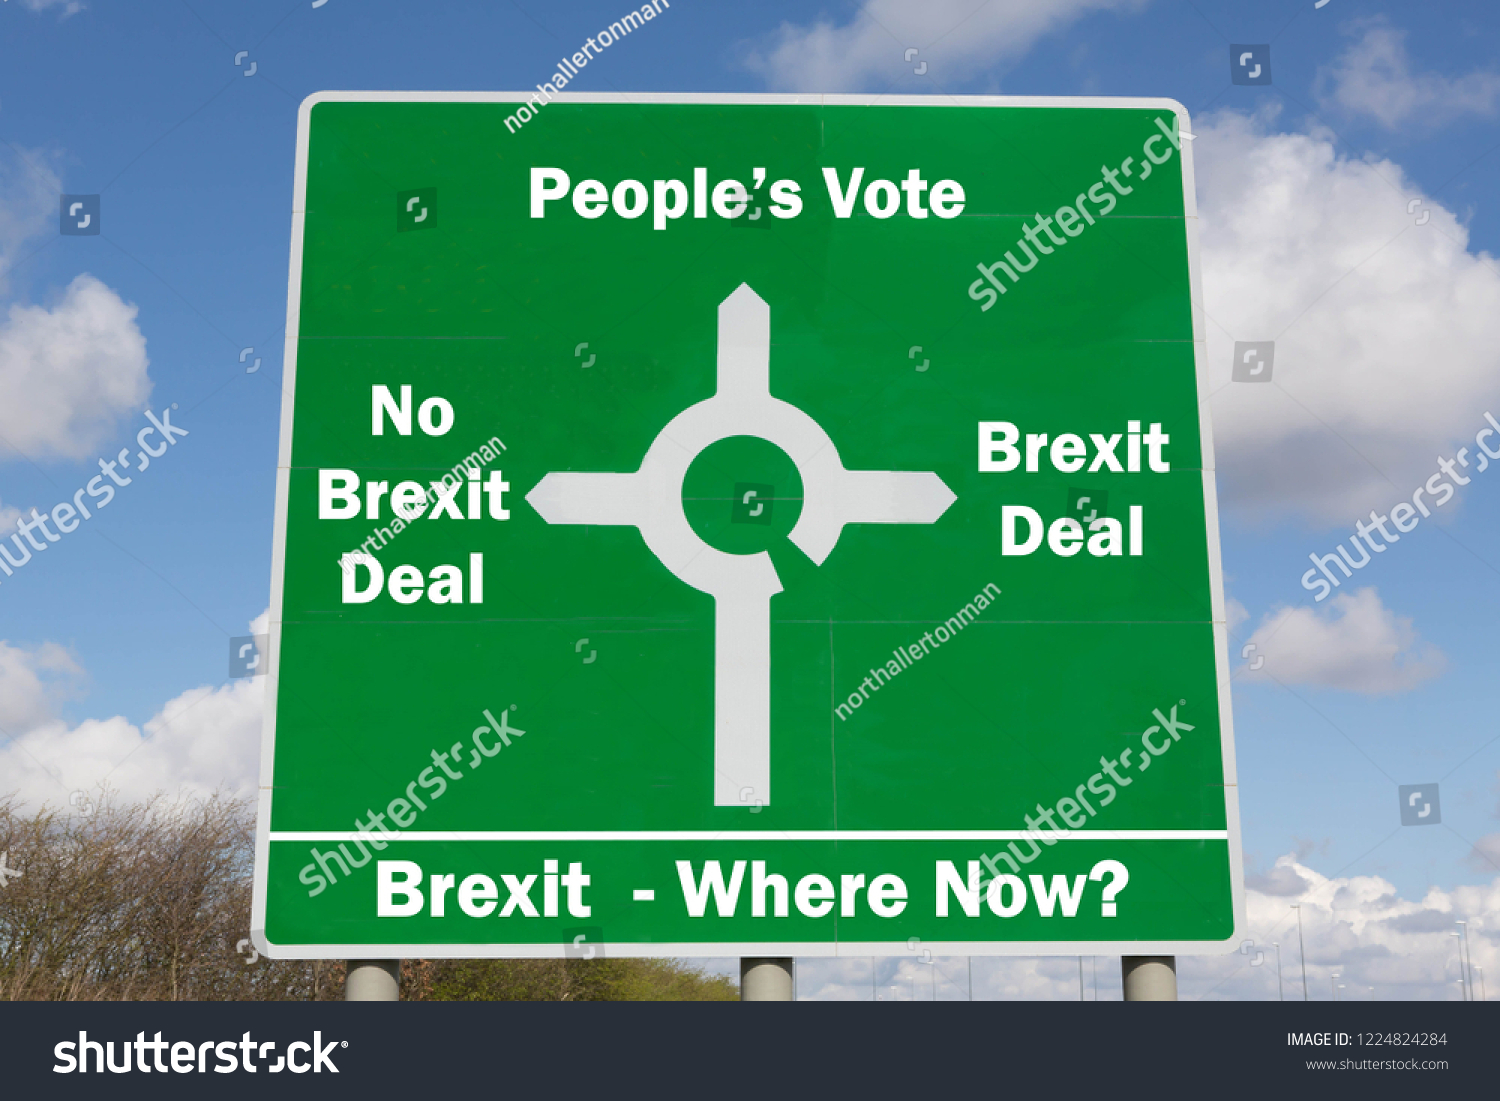 Green roadsign with options for Brexit negotiations including a Bexit deal, no Brexit deal or a People's Vote.  #1224824284